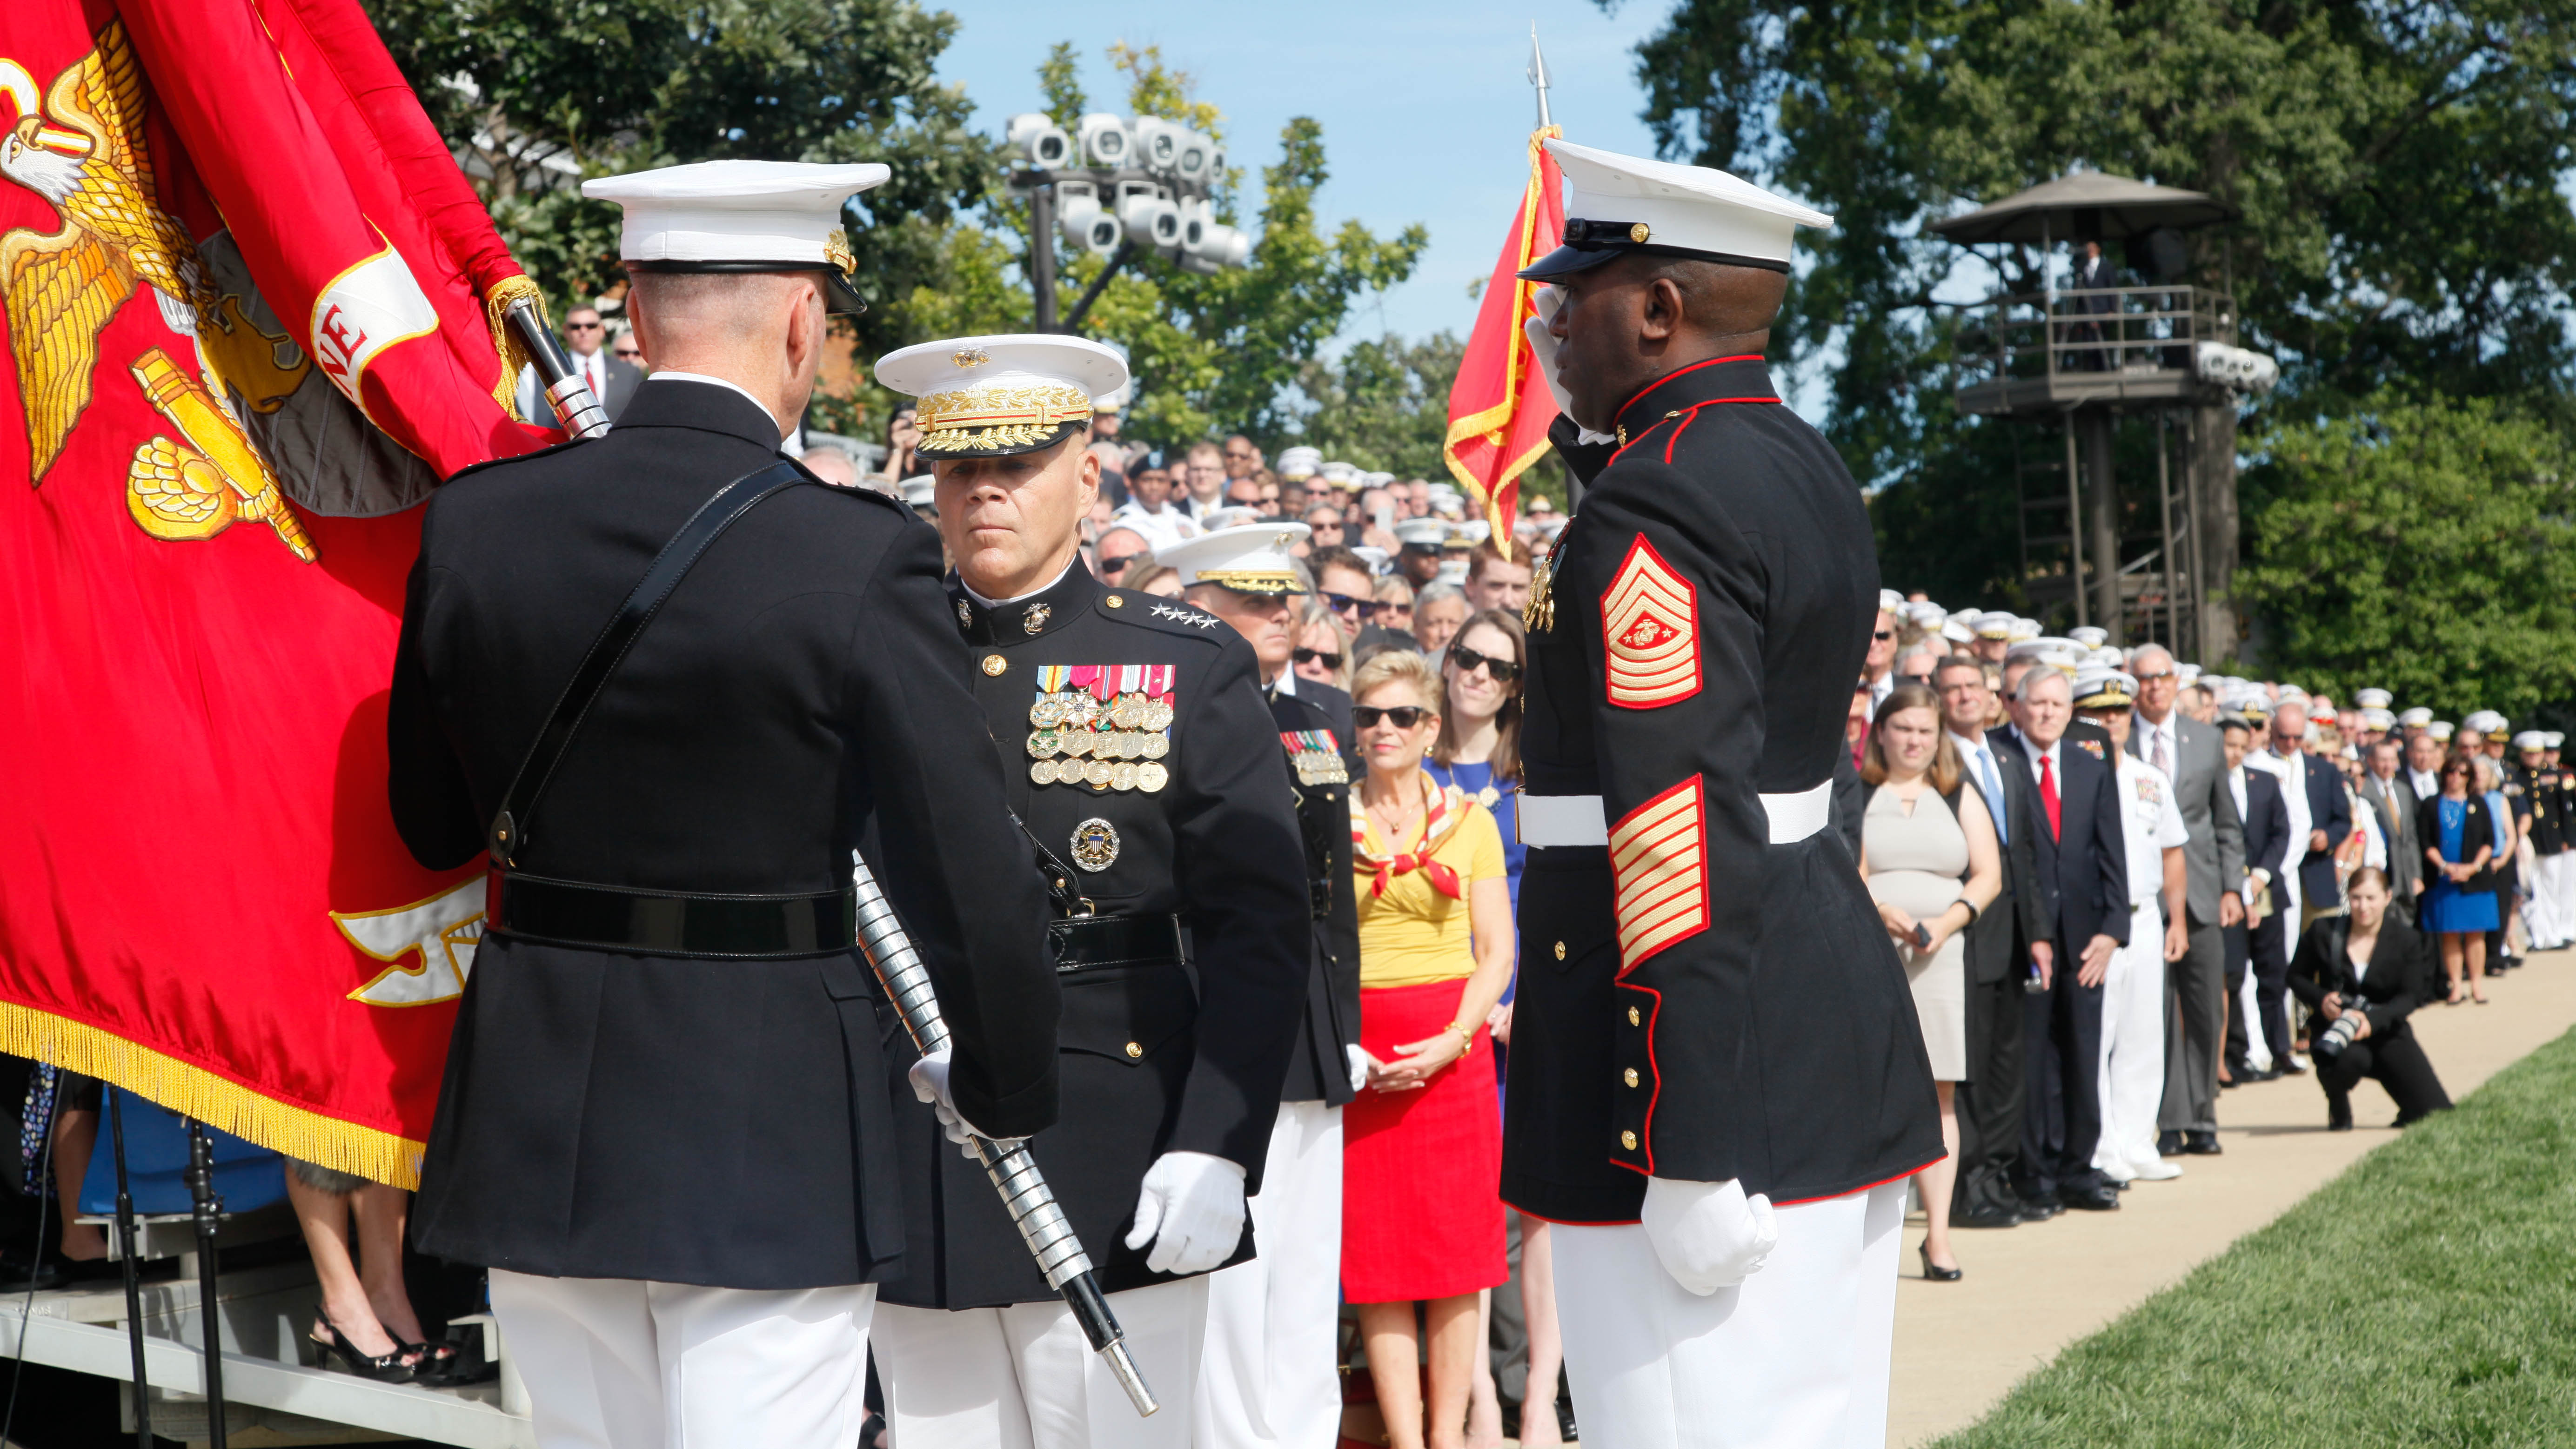 Passage of command: Neller becomes 37th Commandant of the Marine Corps ...